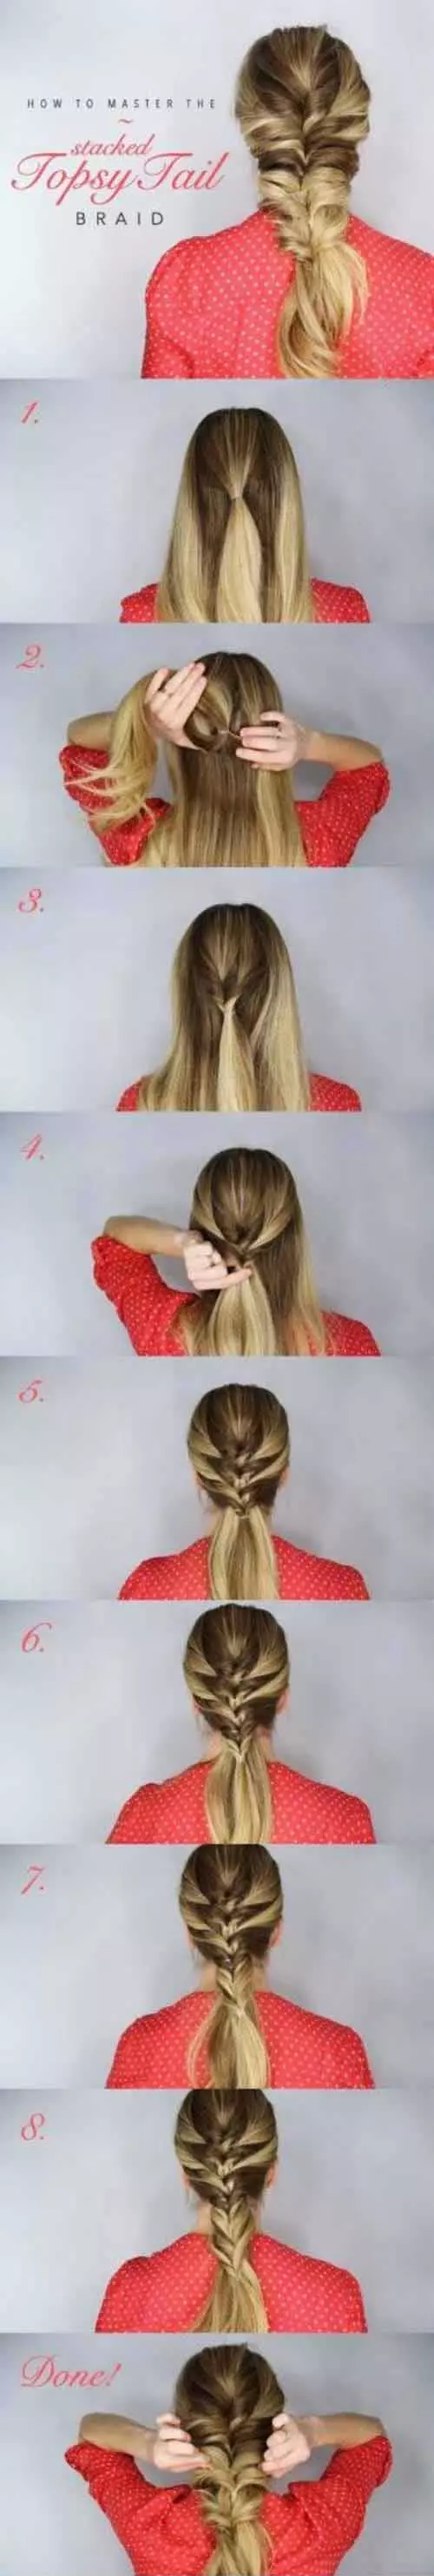 Topsy tail braided hairstyle for girls